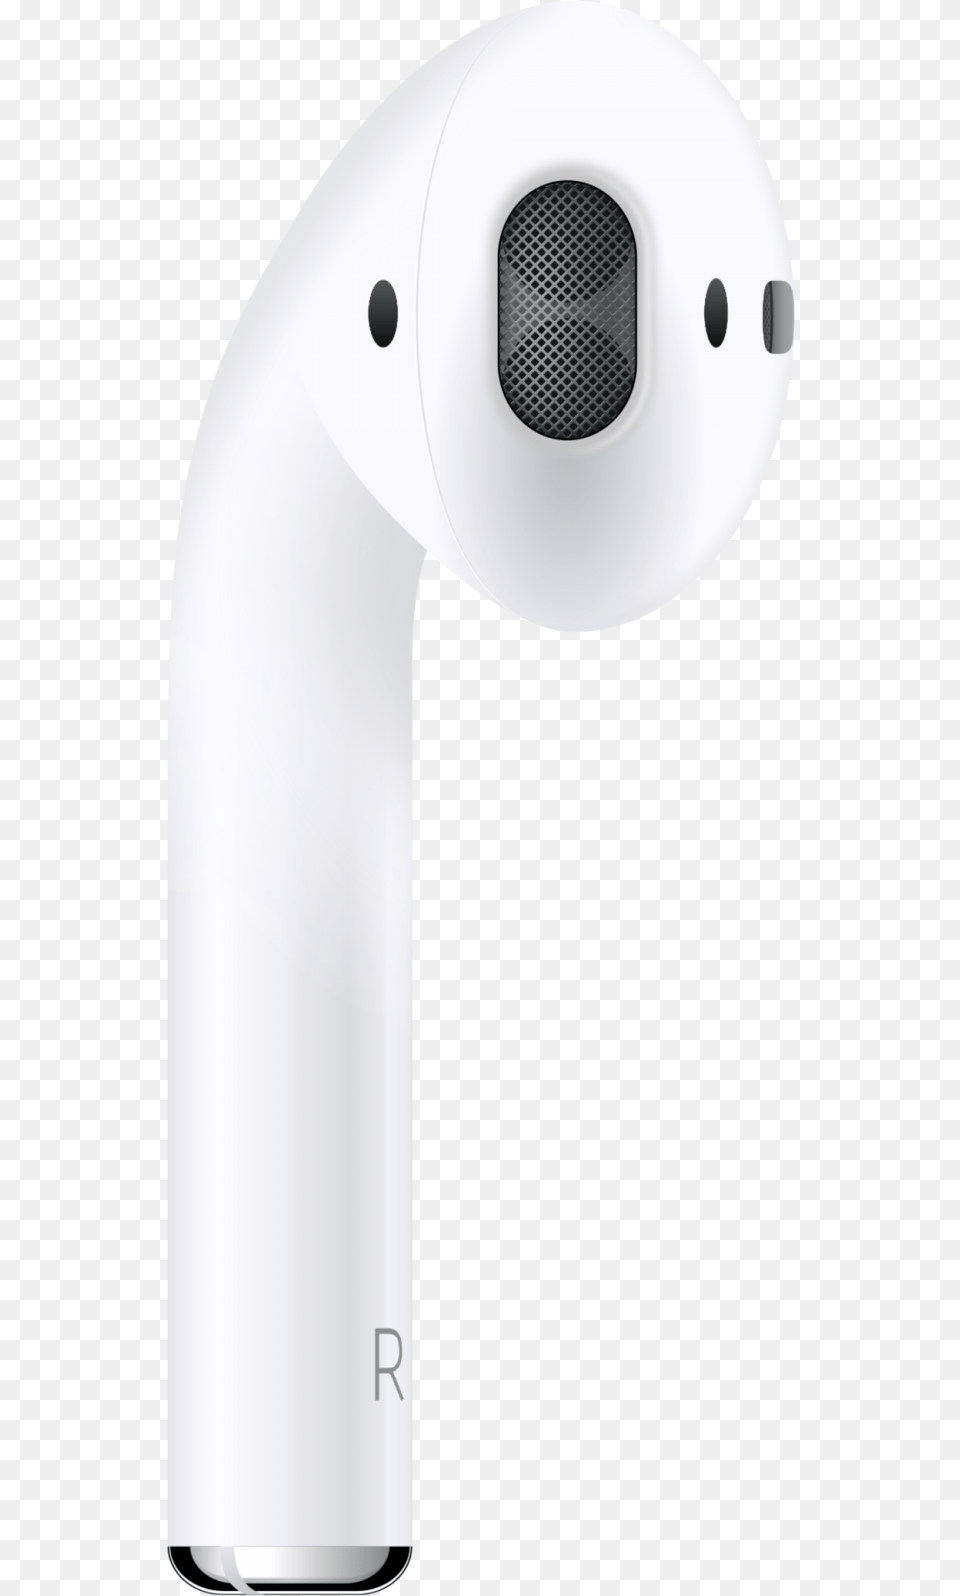 Hardware Airpods Angle Iphone Headphones Download Hd Airpod Png